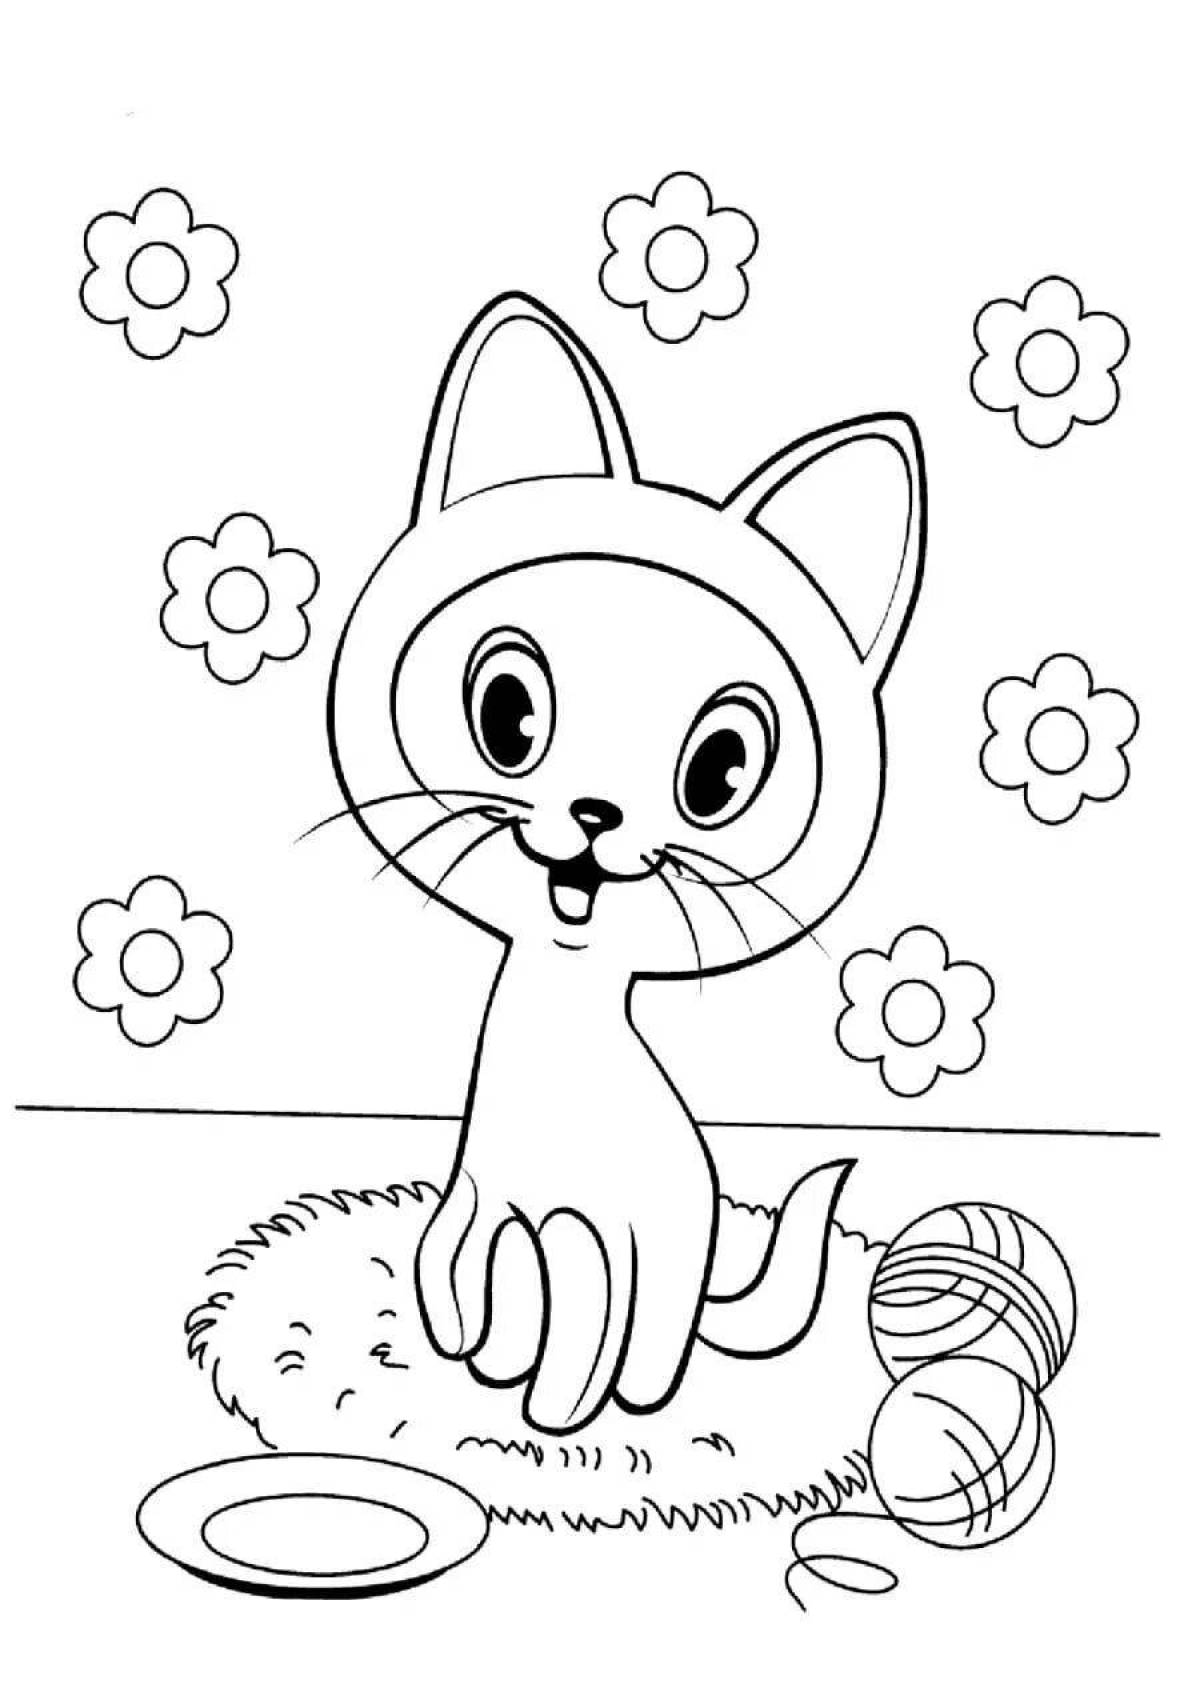 Coloring book playful cat for kids